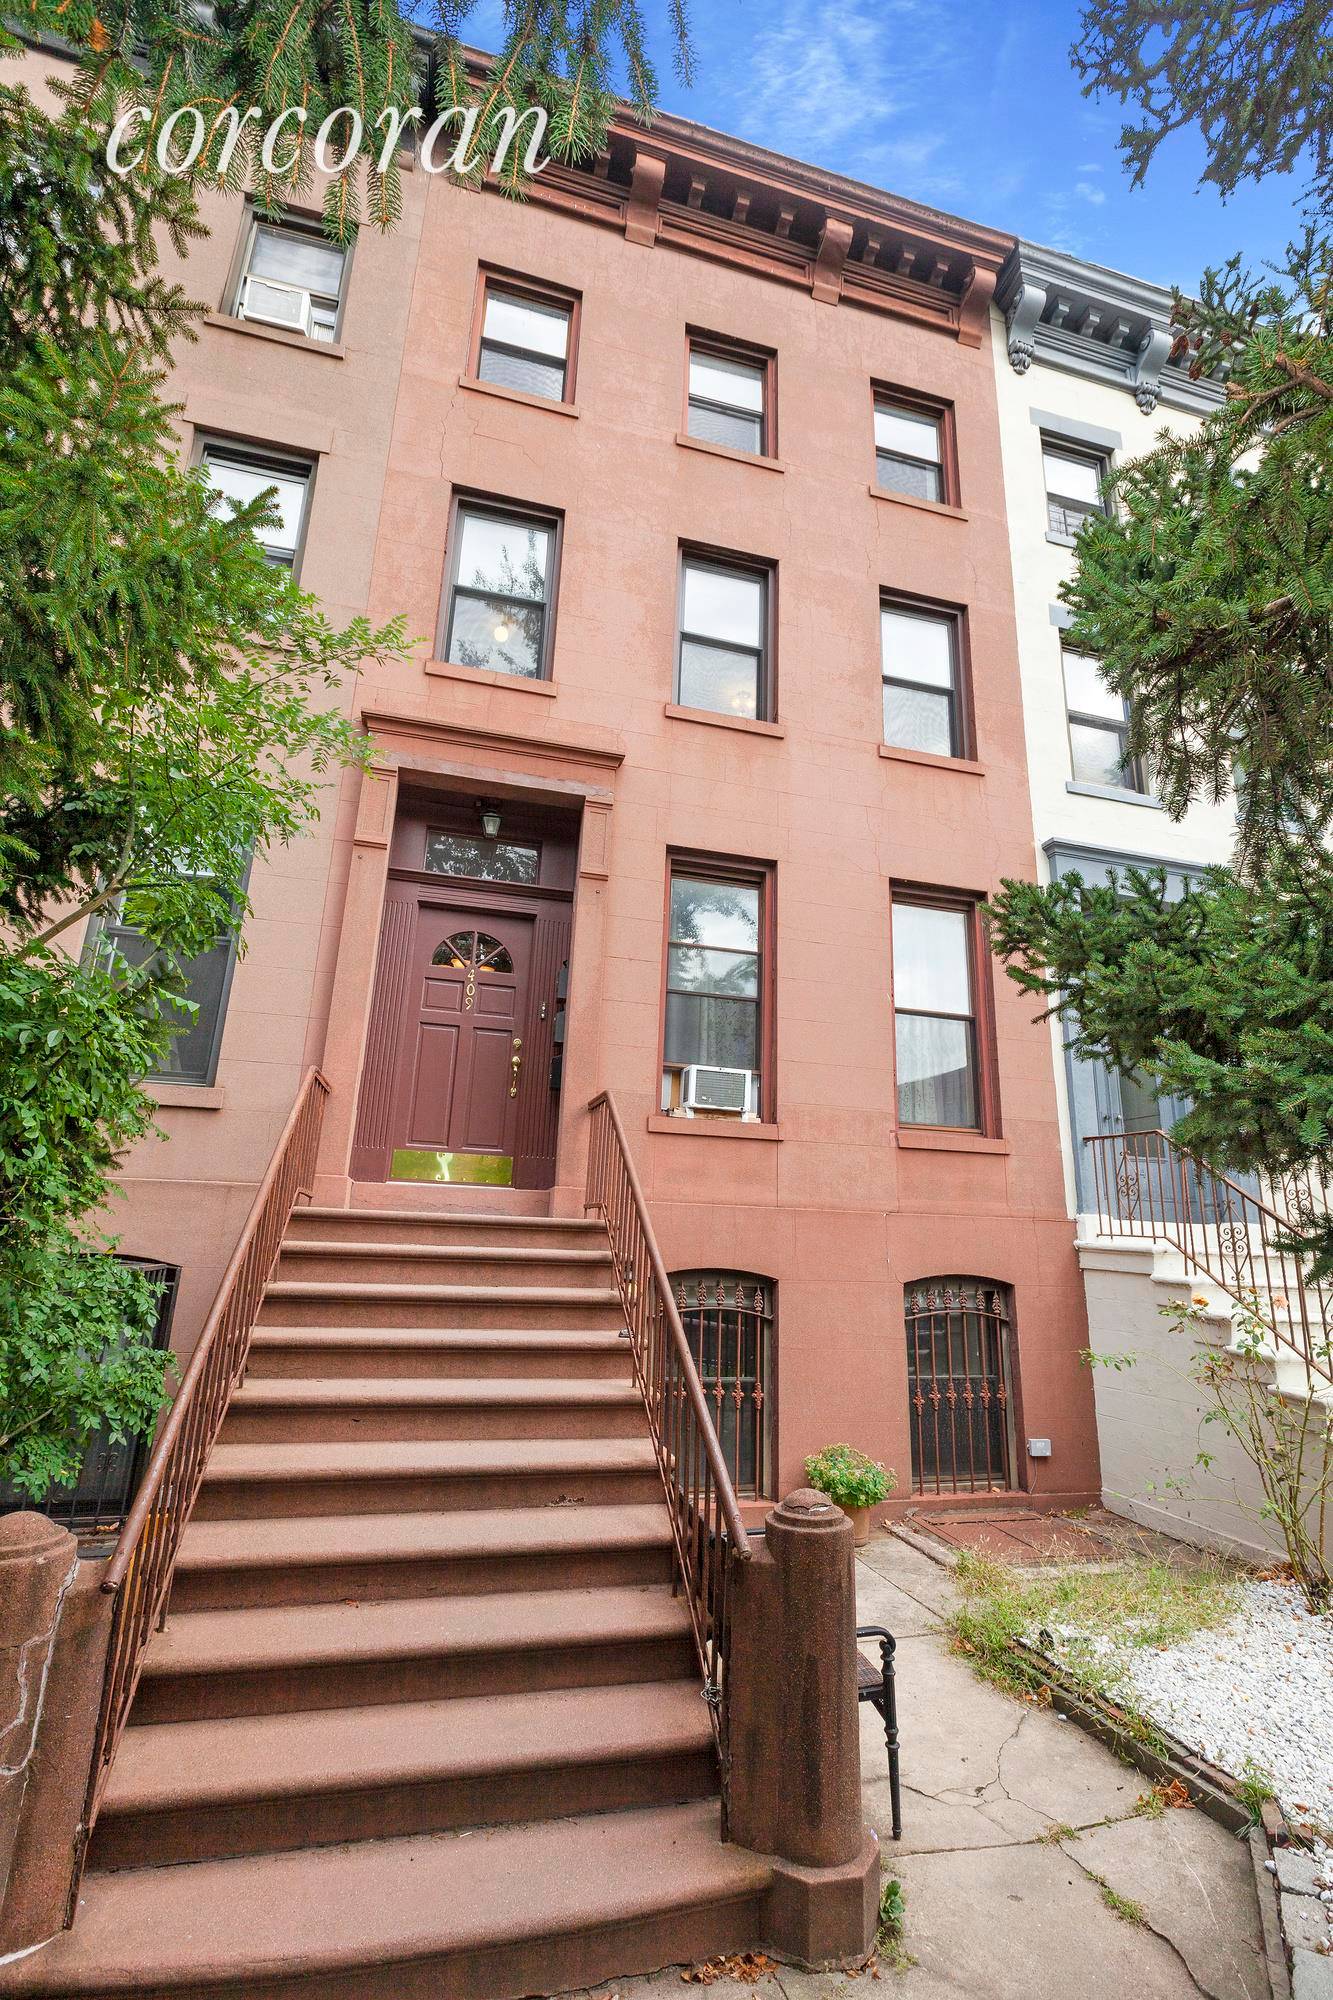 With the quintessential character of brownstone Brooklyn, the premier location in the heart of historic Carroll Gardens, and the incredibly low taxes, the possibilities at 409 Union Street are enticing ...